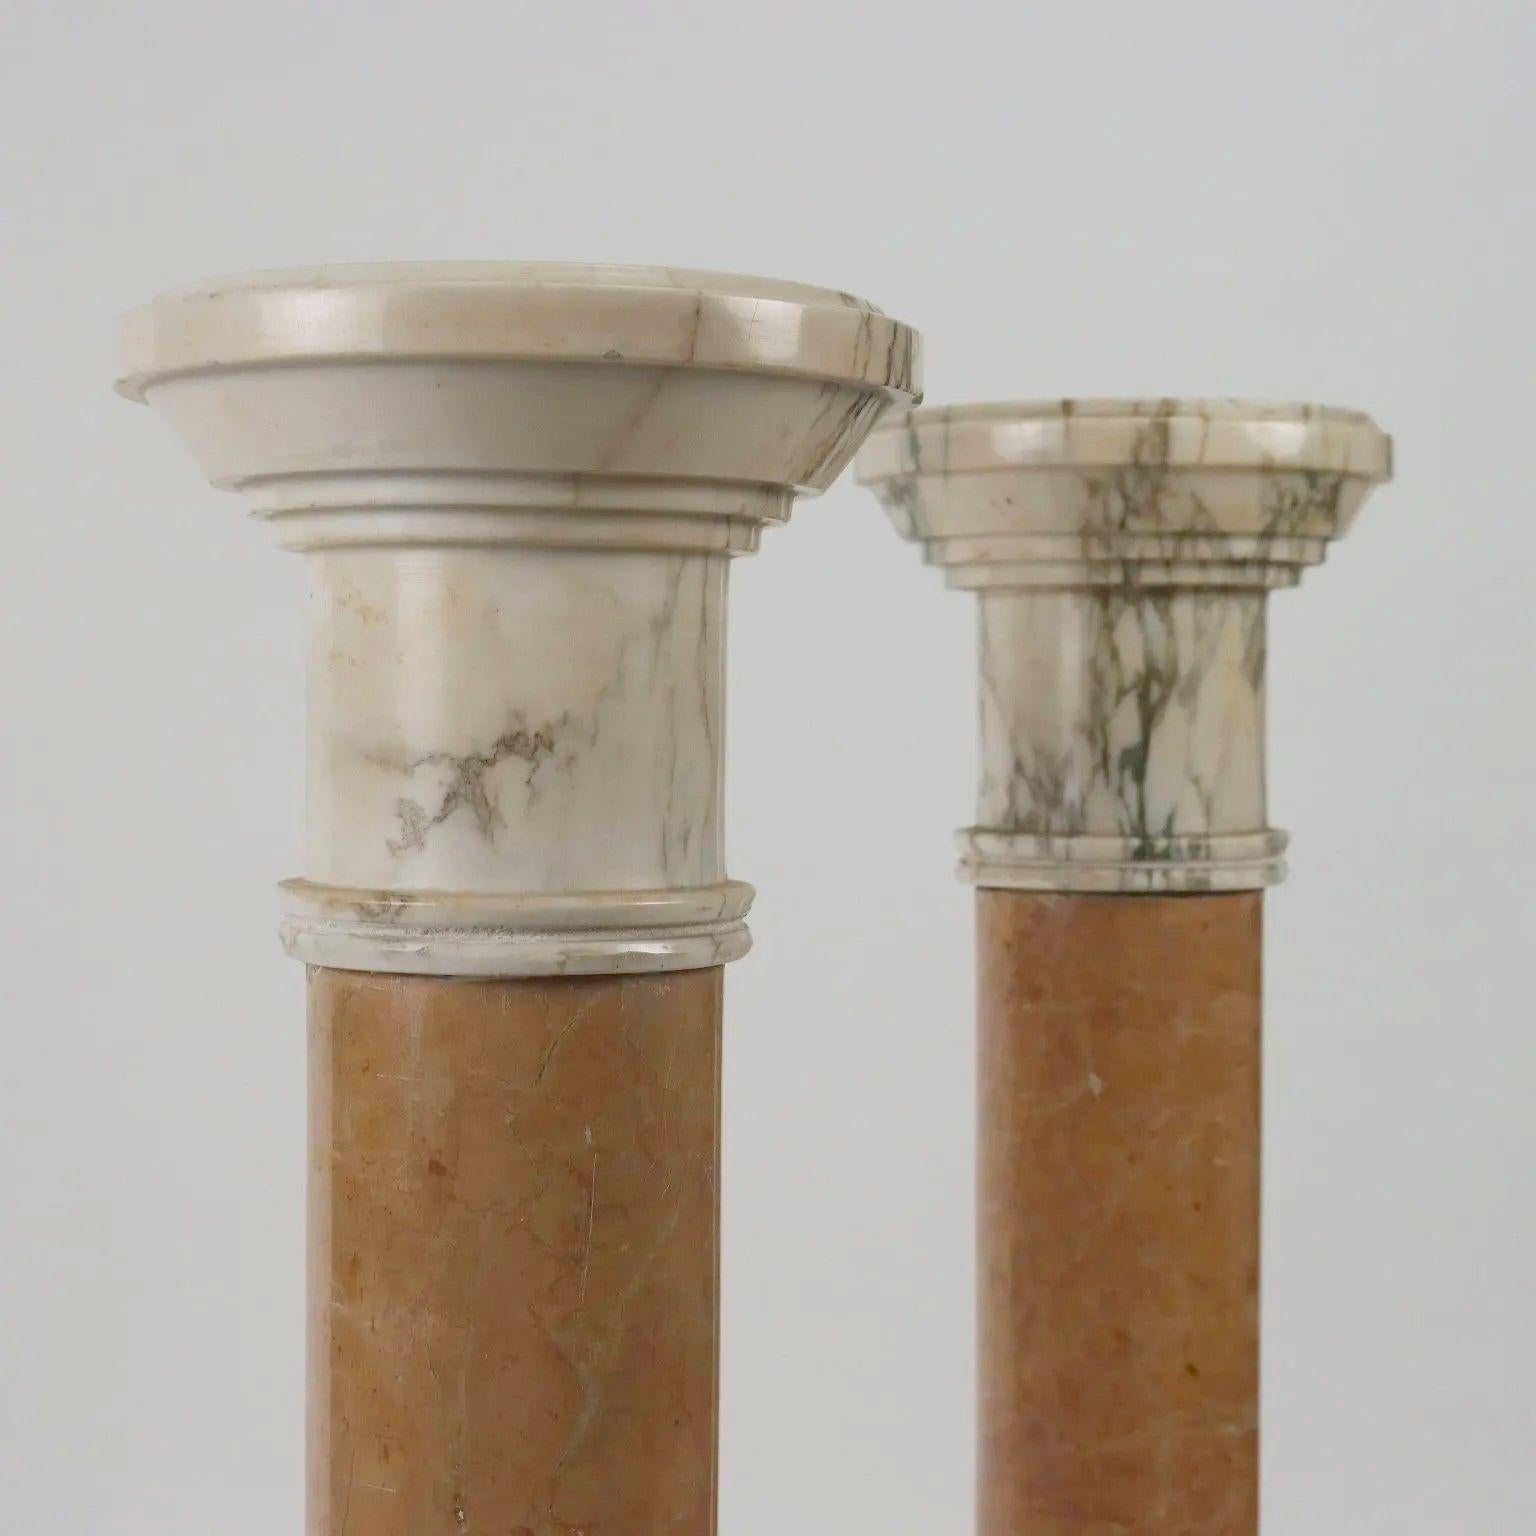 Each cylindrical shaft with molded top raised on circular base 